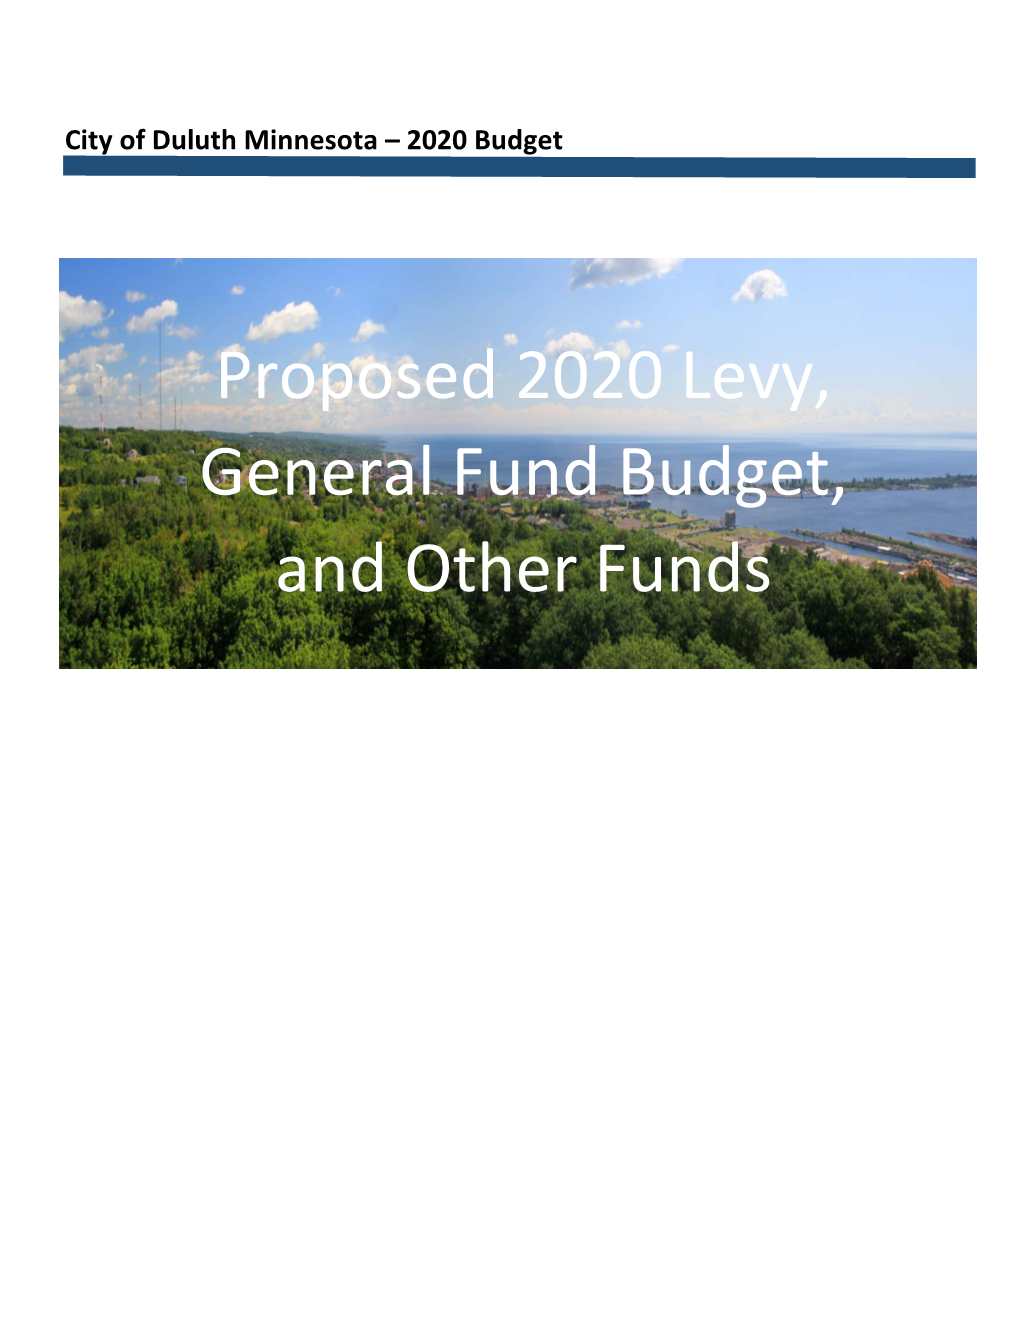 Proposed 2020 Levy, General Fund Budget, and Other Funds City of Duluth Minnesota - 2020 Budget